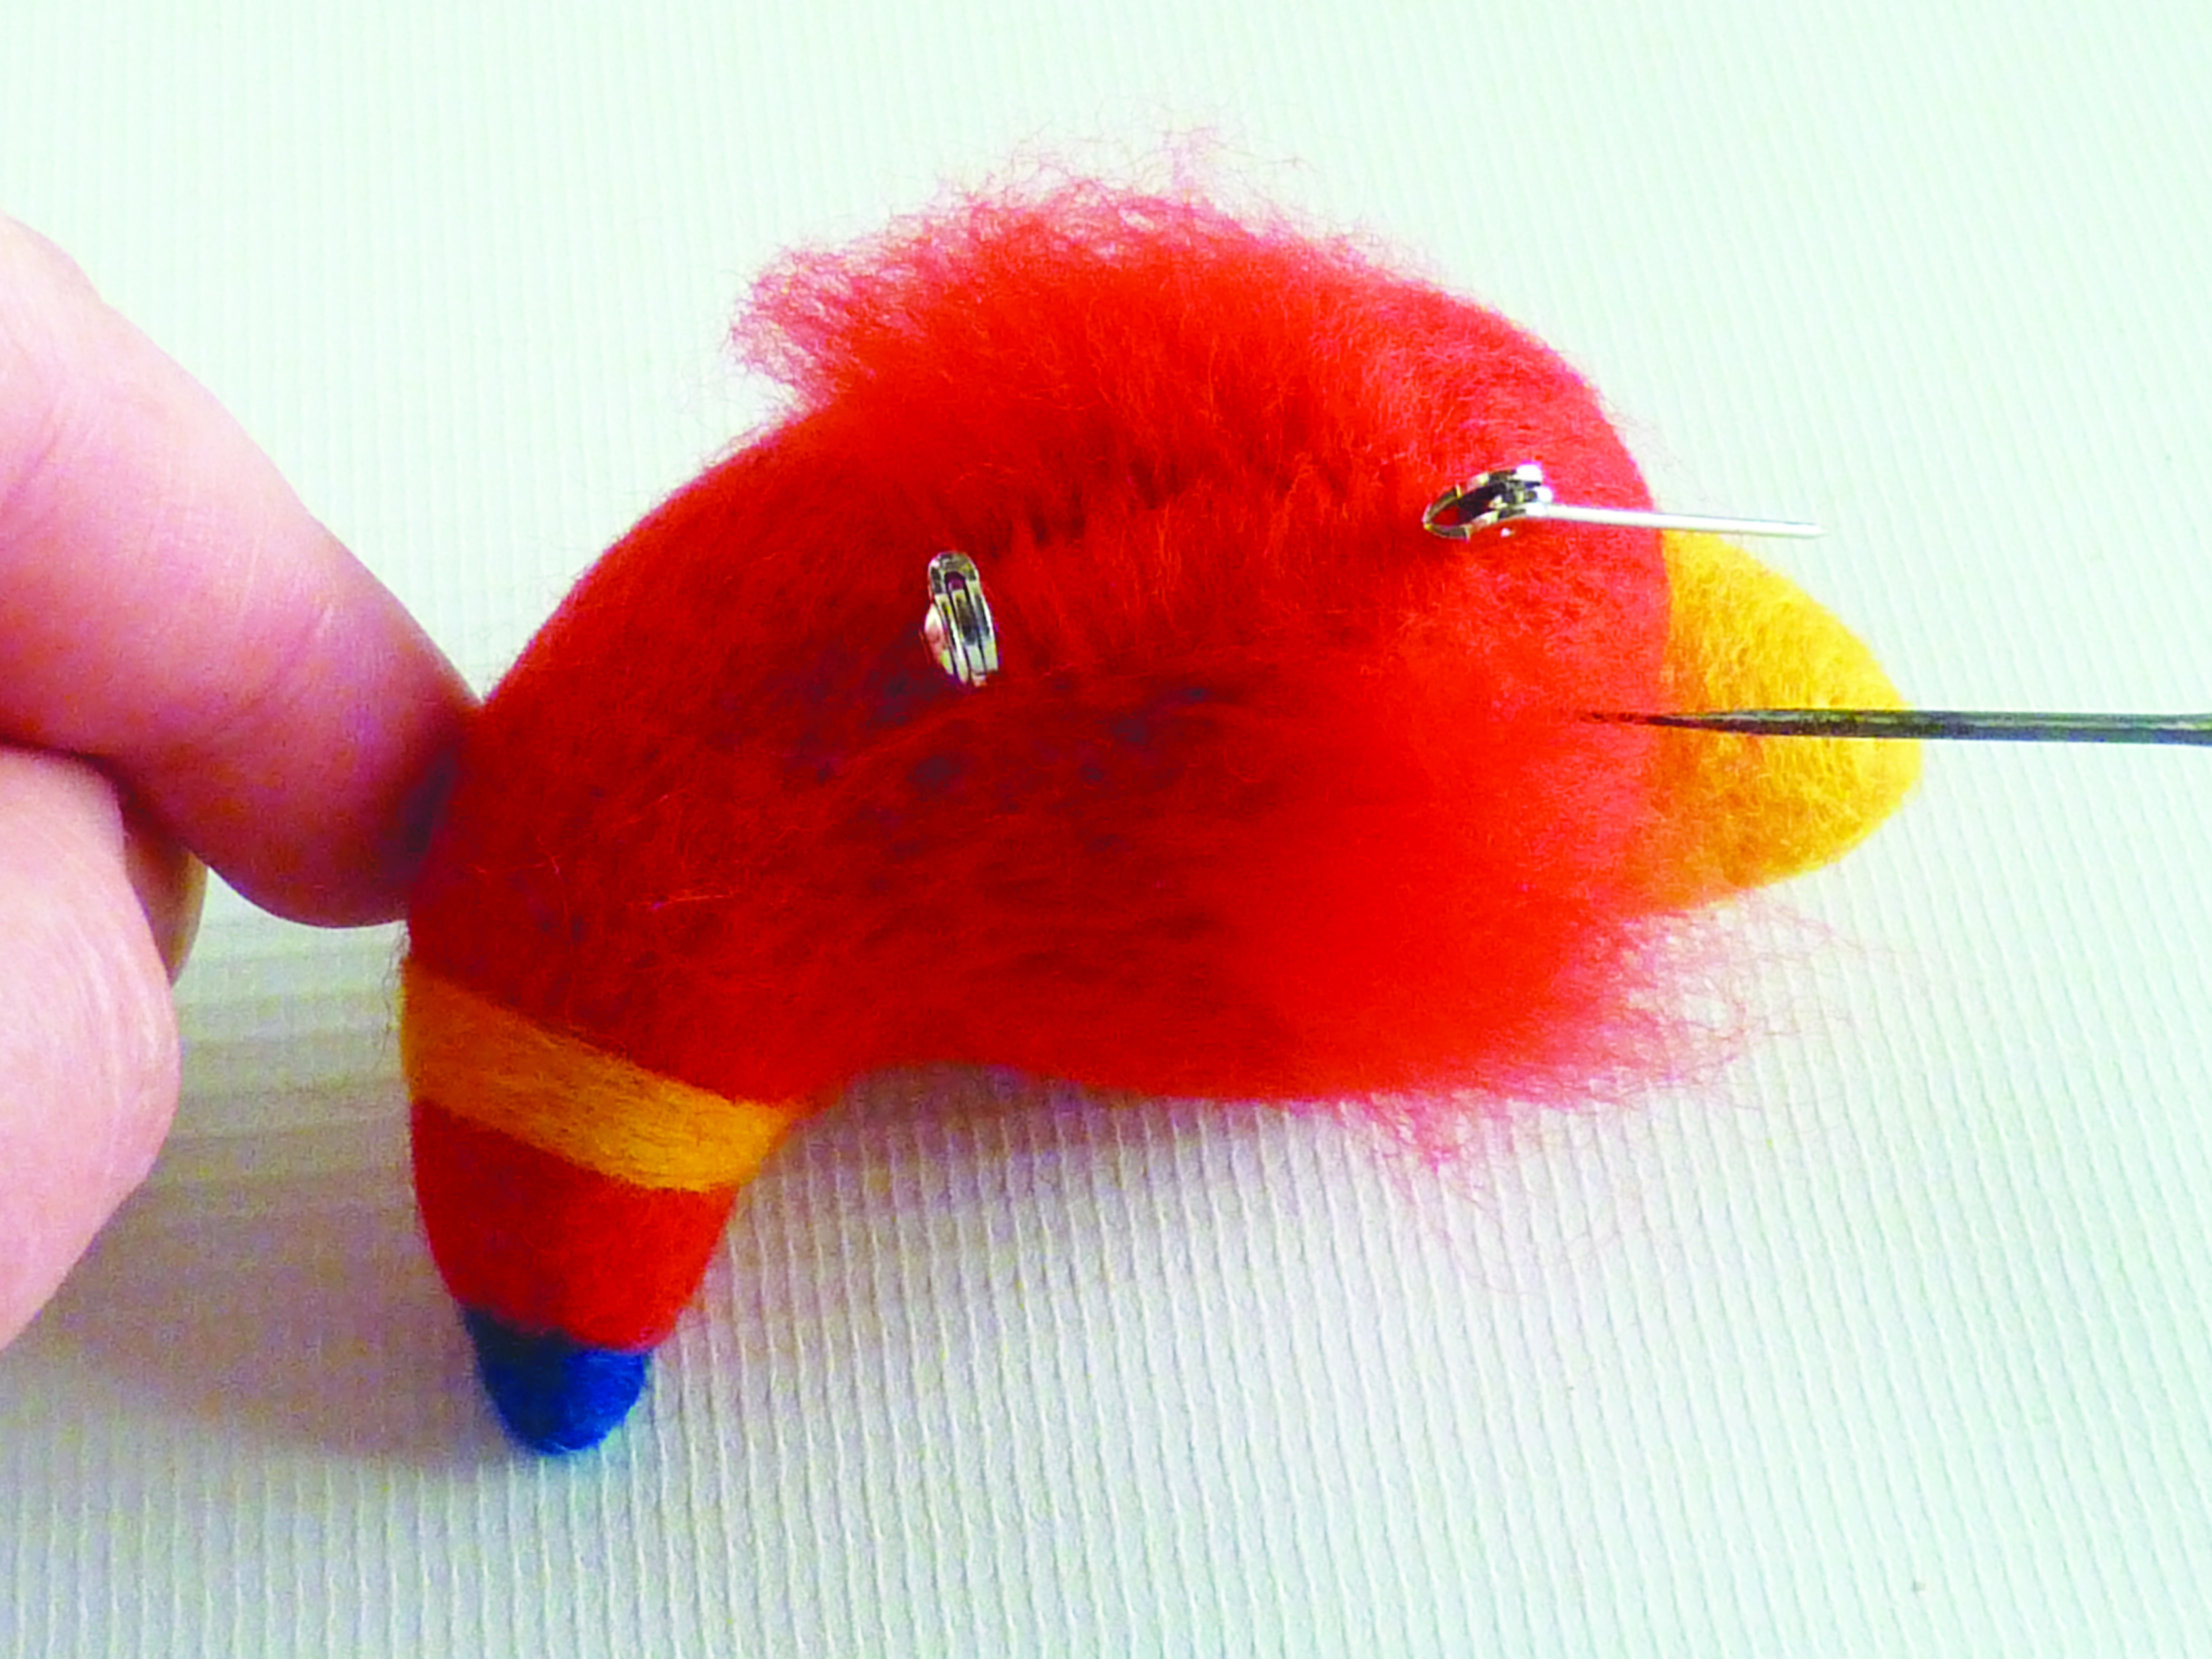 Beginner’s guide to needle felting, how to sew on a brooch pin, step 2